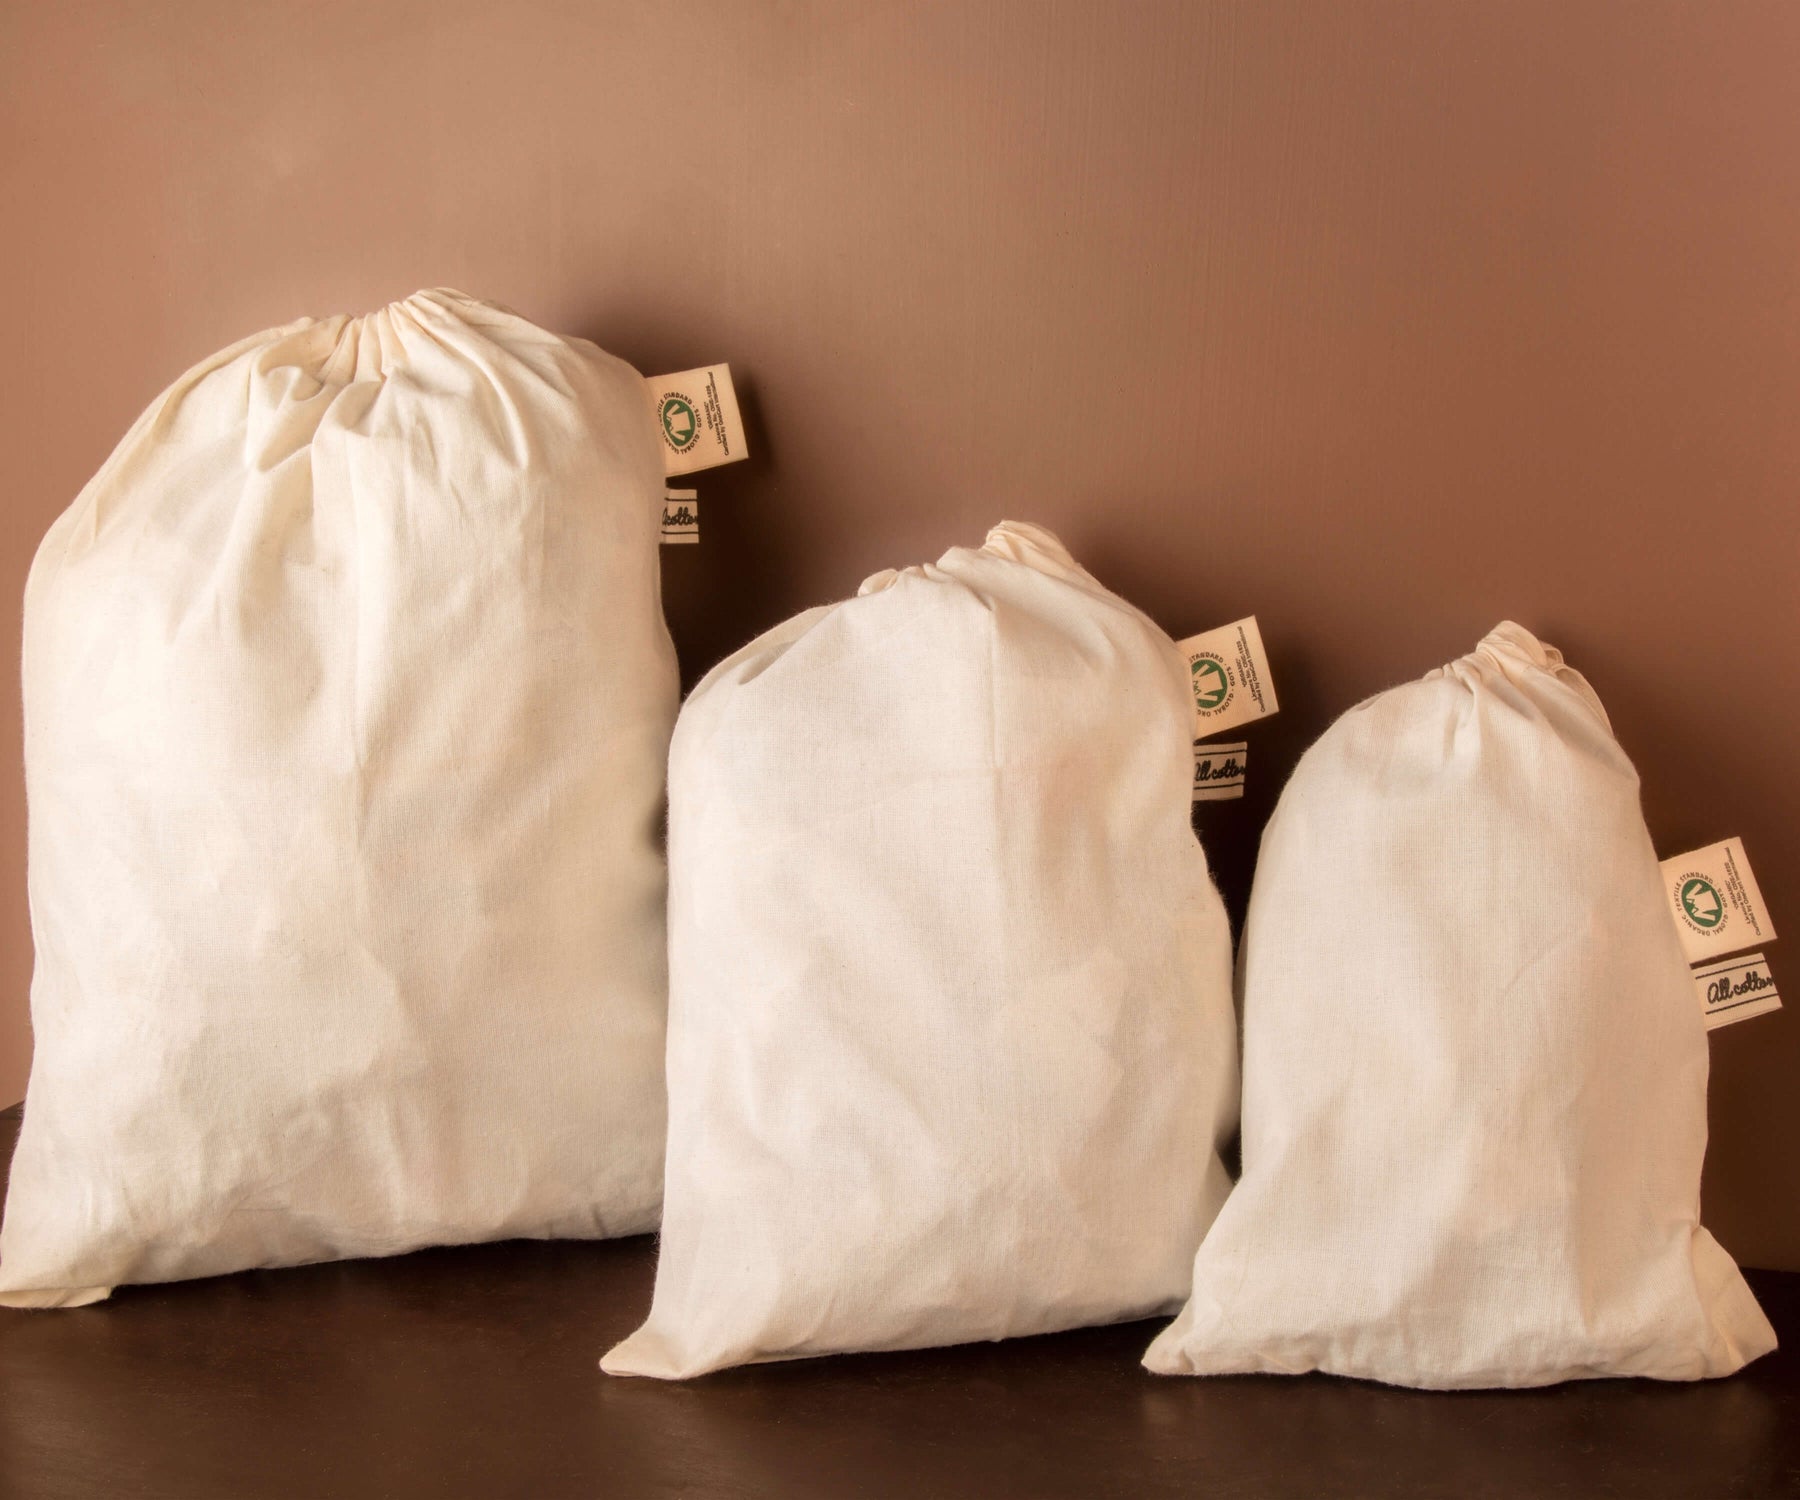 10 Ways to use Muslin Drawstring Bags for Sustainable Packaging